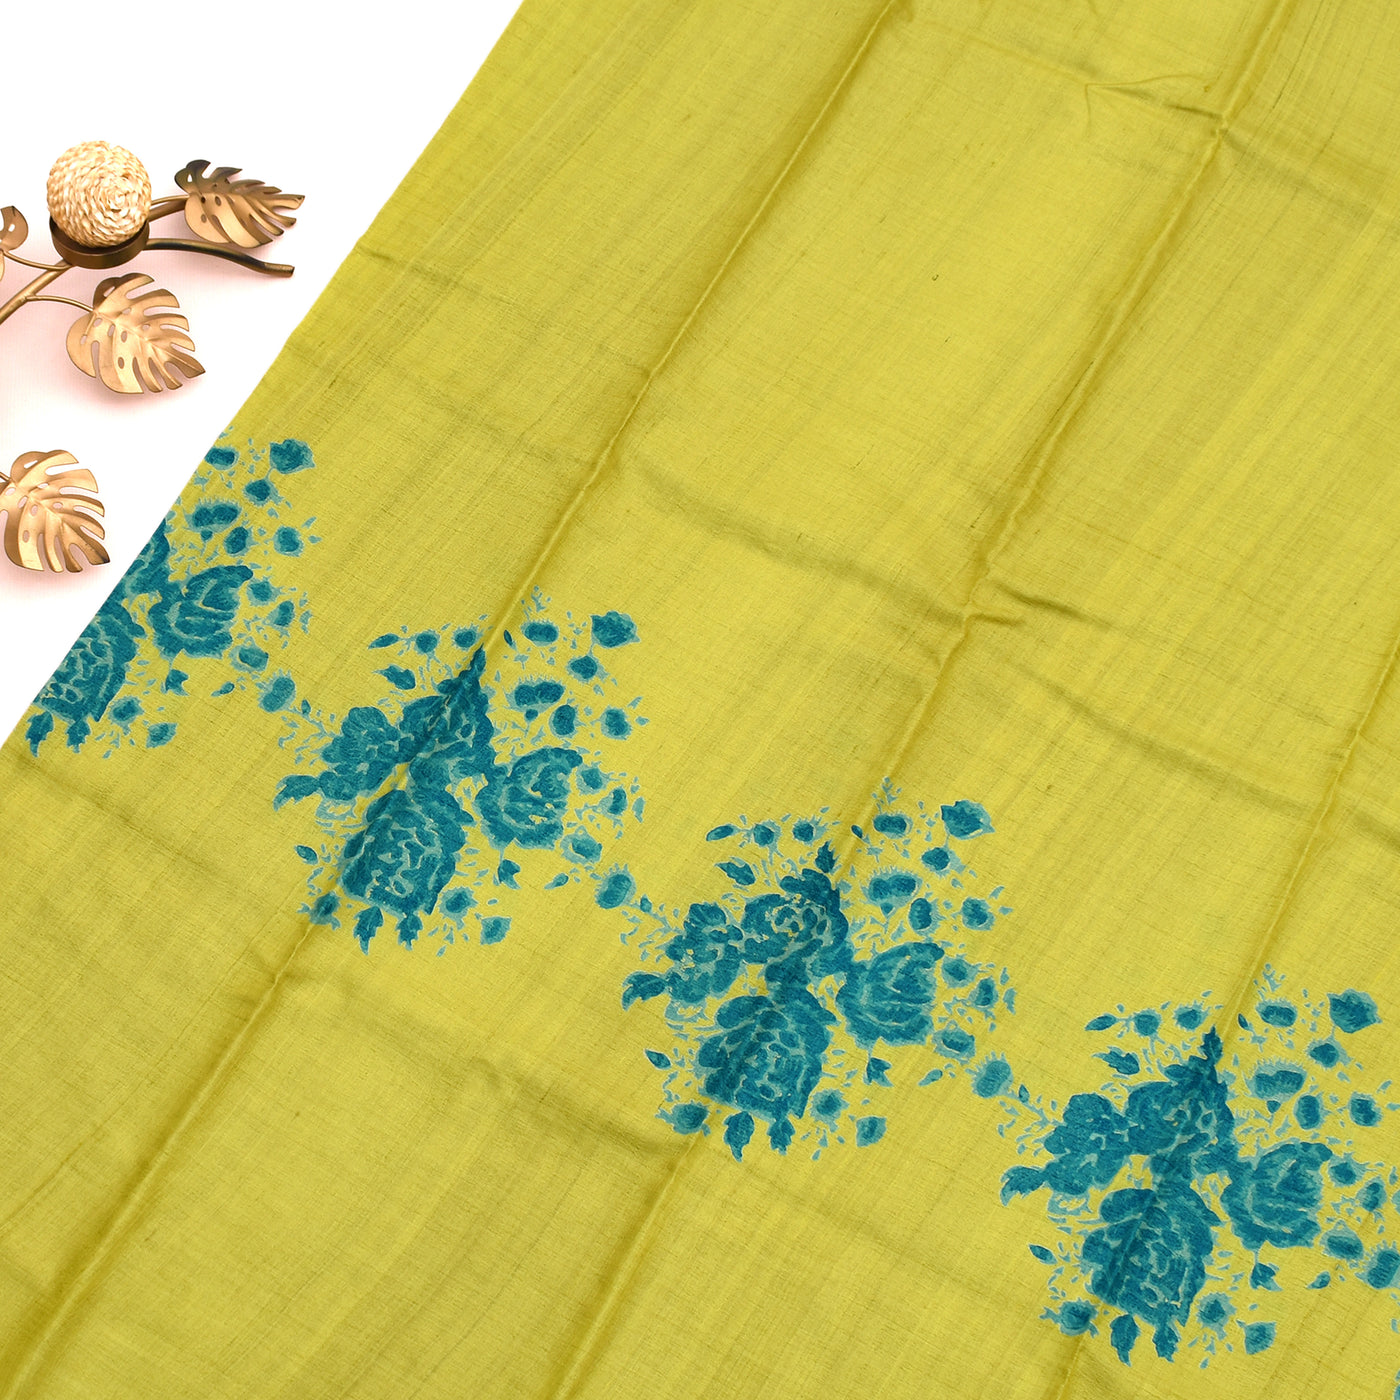 Neon Yellow Tussar Silk Saree with Floral Printed Design